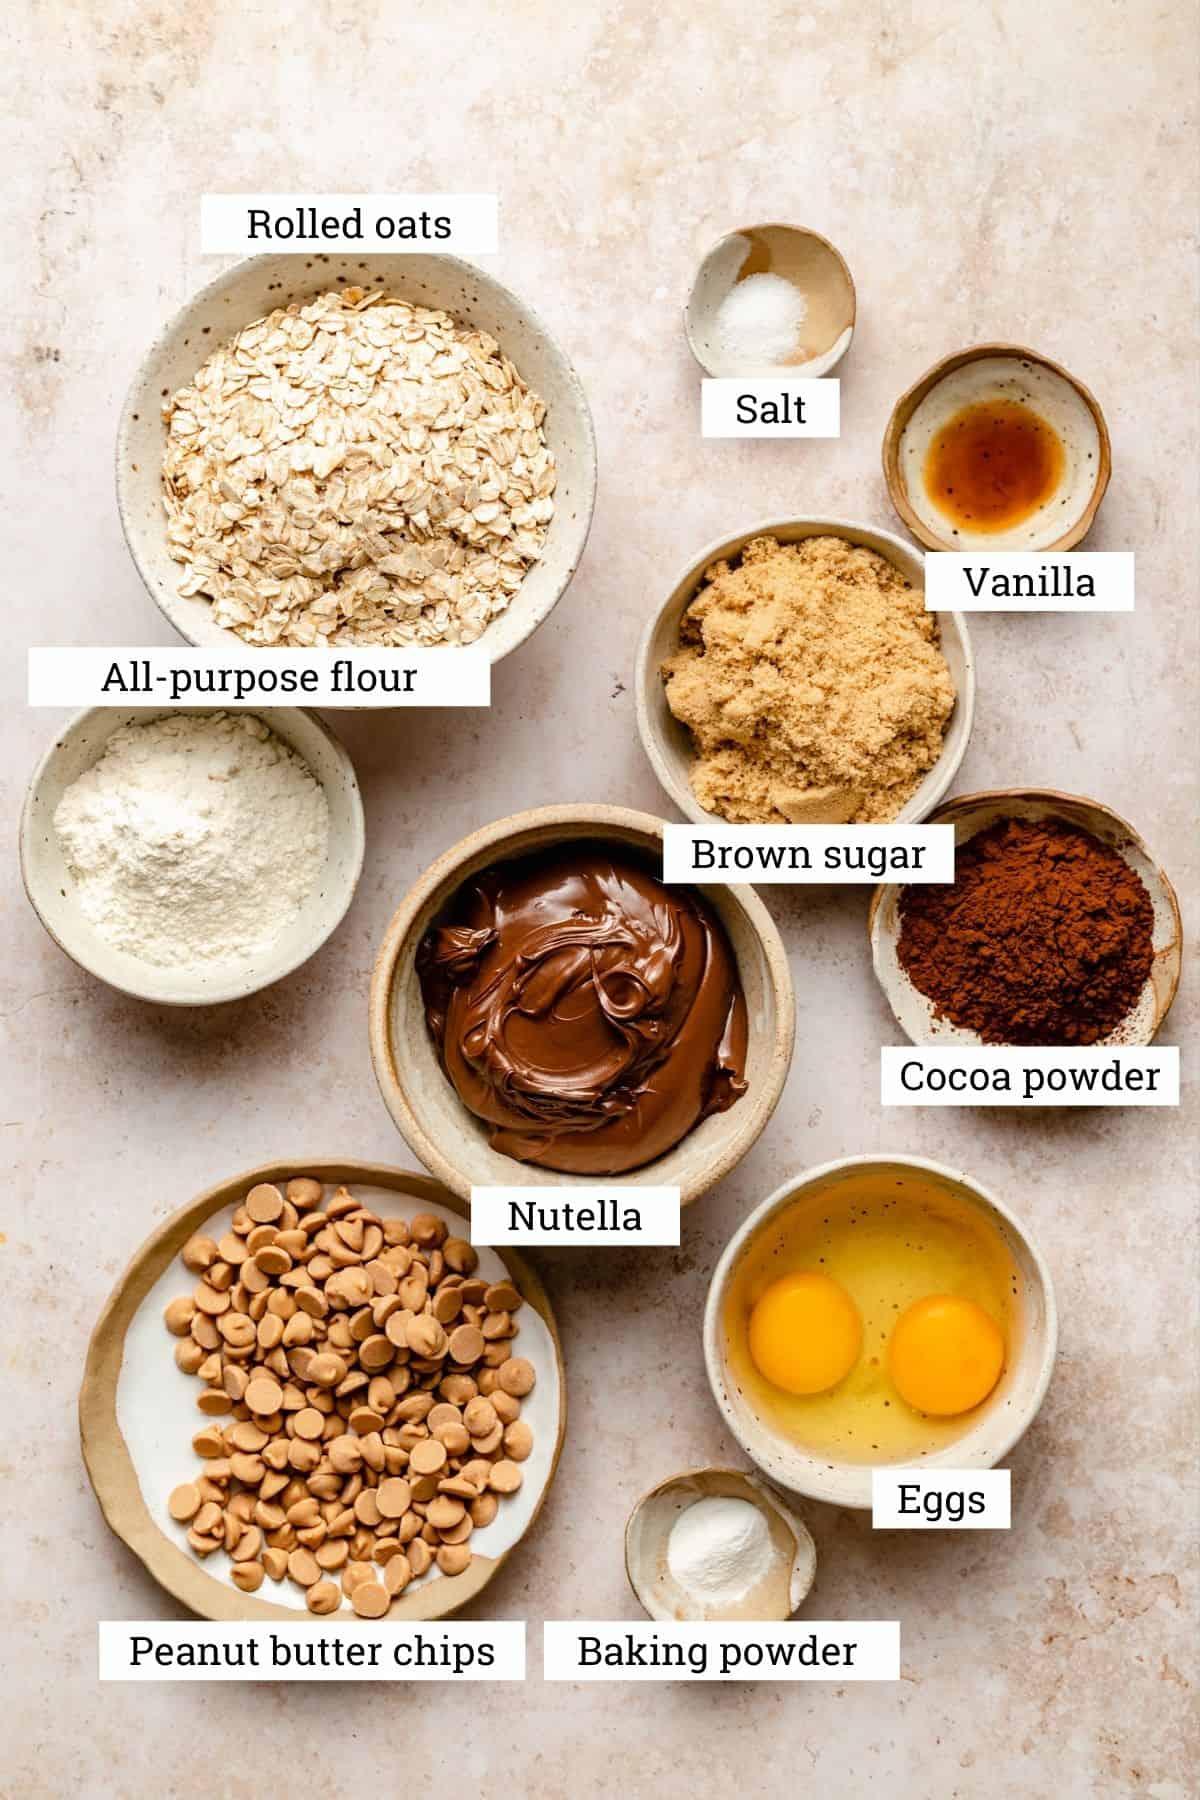 The ingredients for the cookies in various bowls including nutella, oats and peanut butter chips.